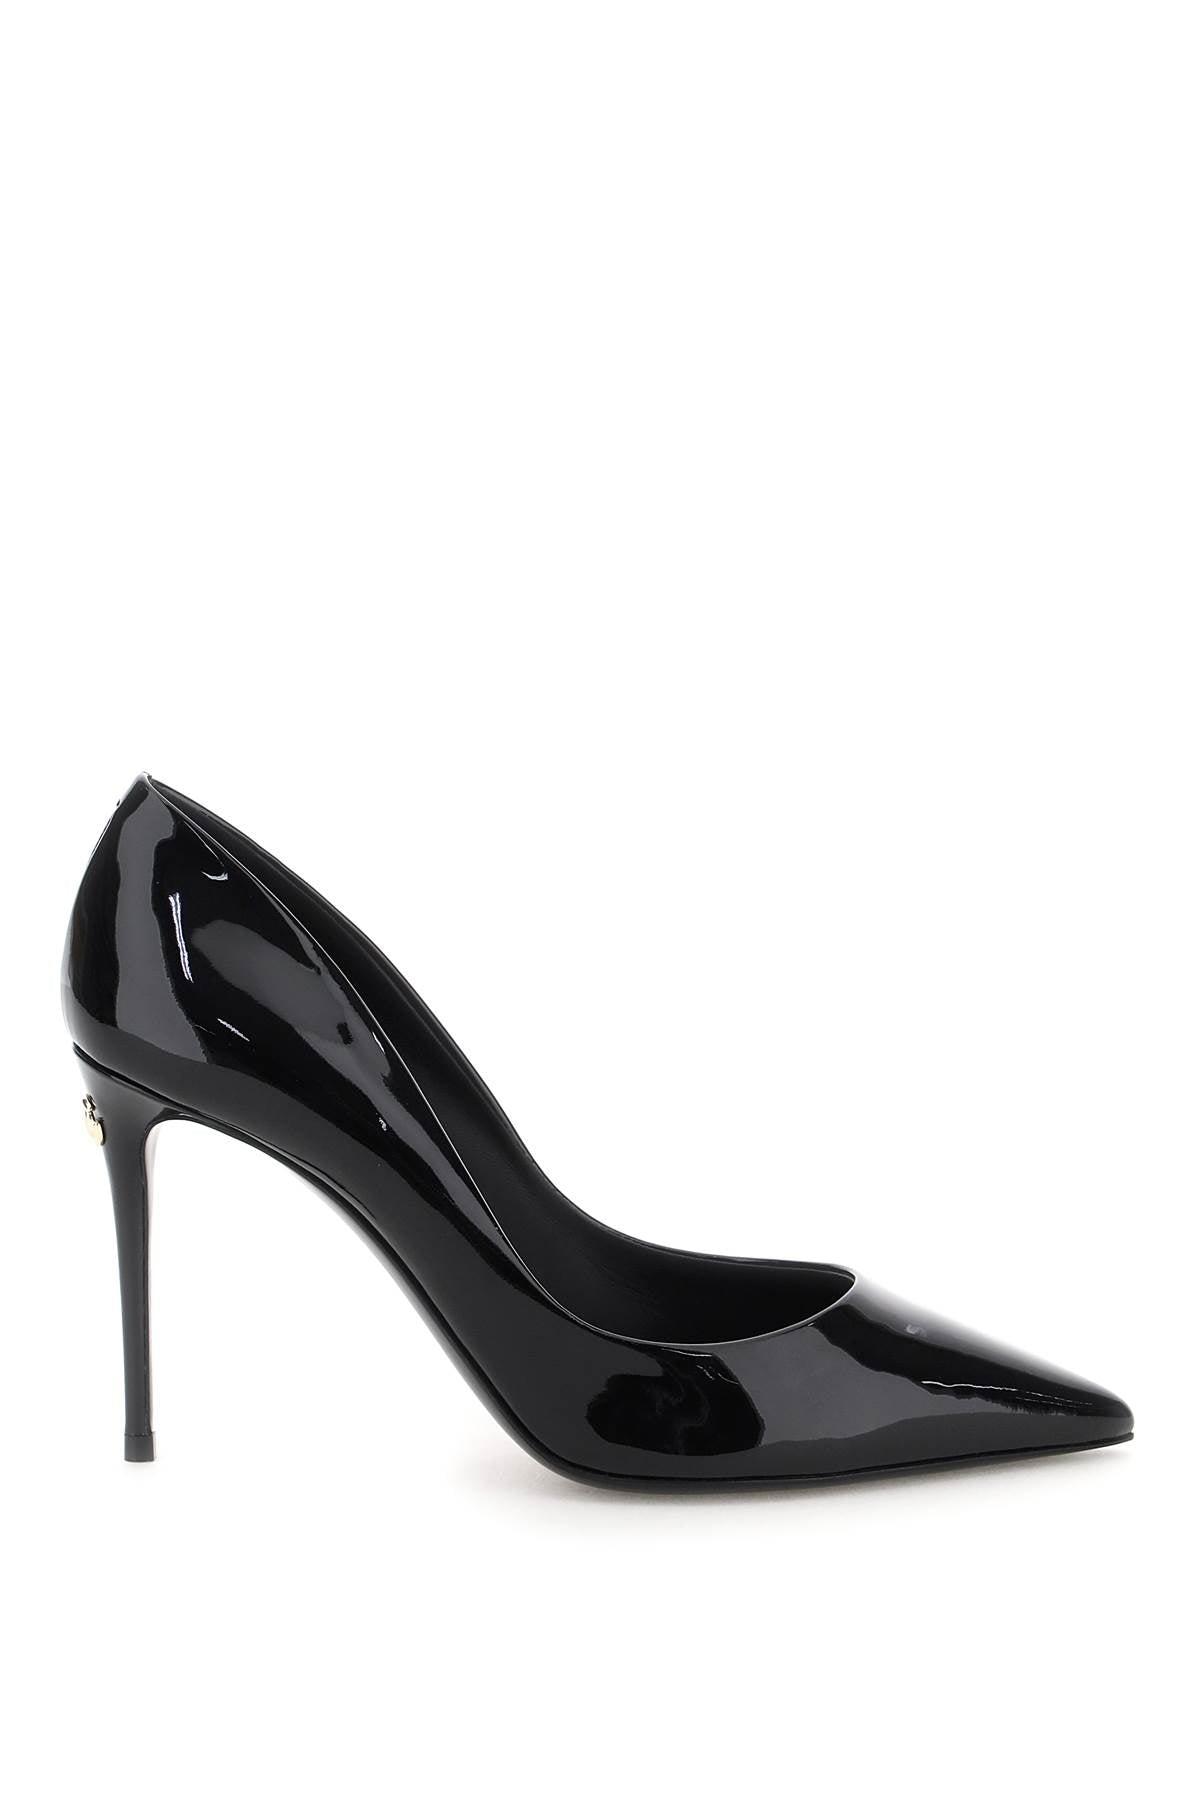 Dolce & Gabbana Patent Leather Pumps in Black - Save 13% | Lyst